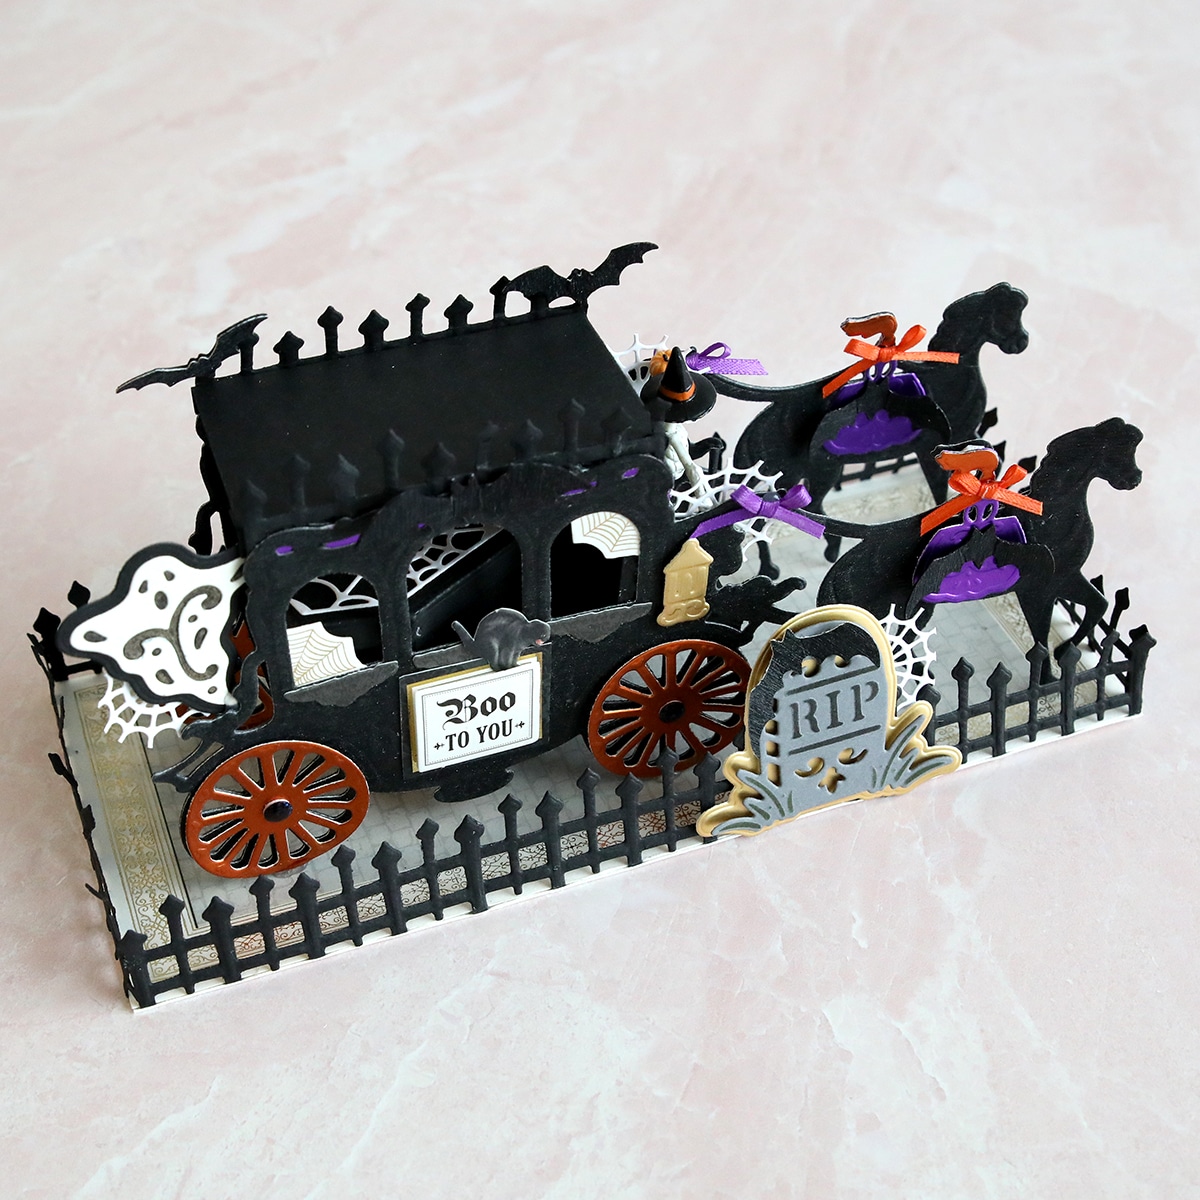 A pop up halloween carriage with bats and skeletons.